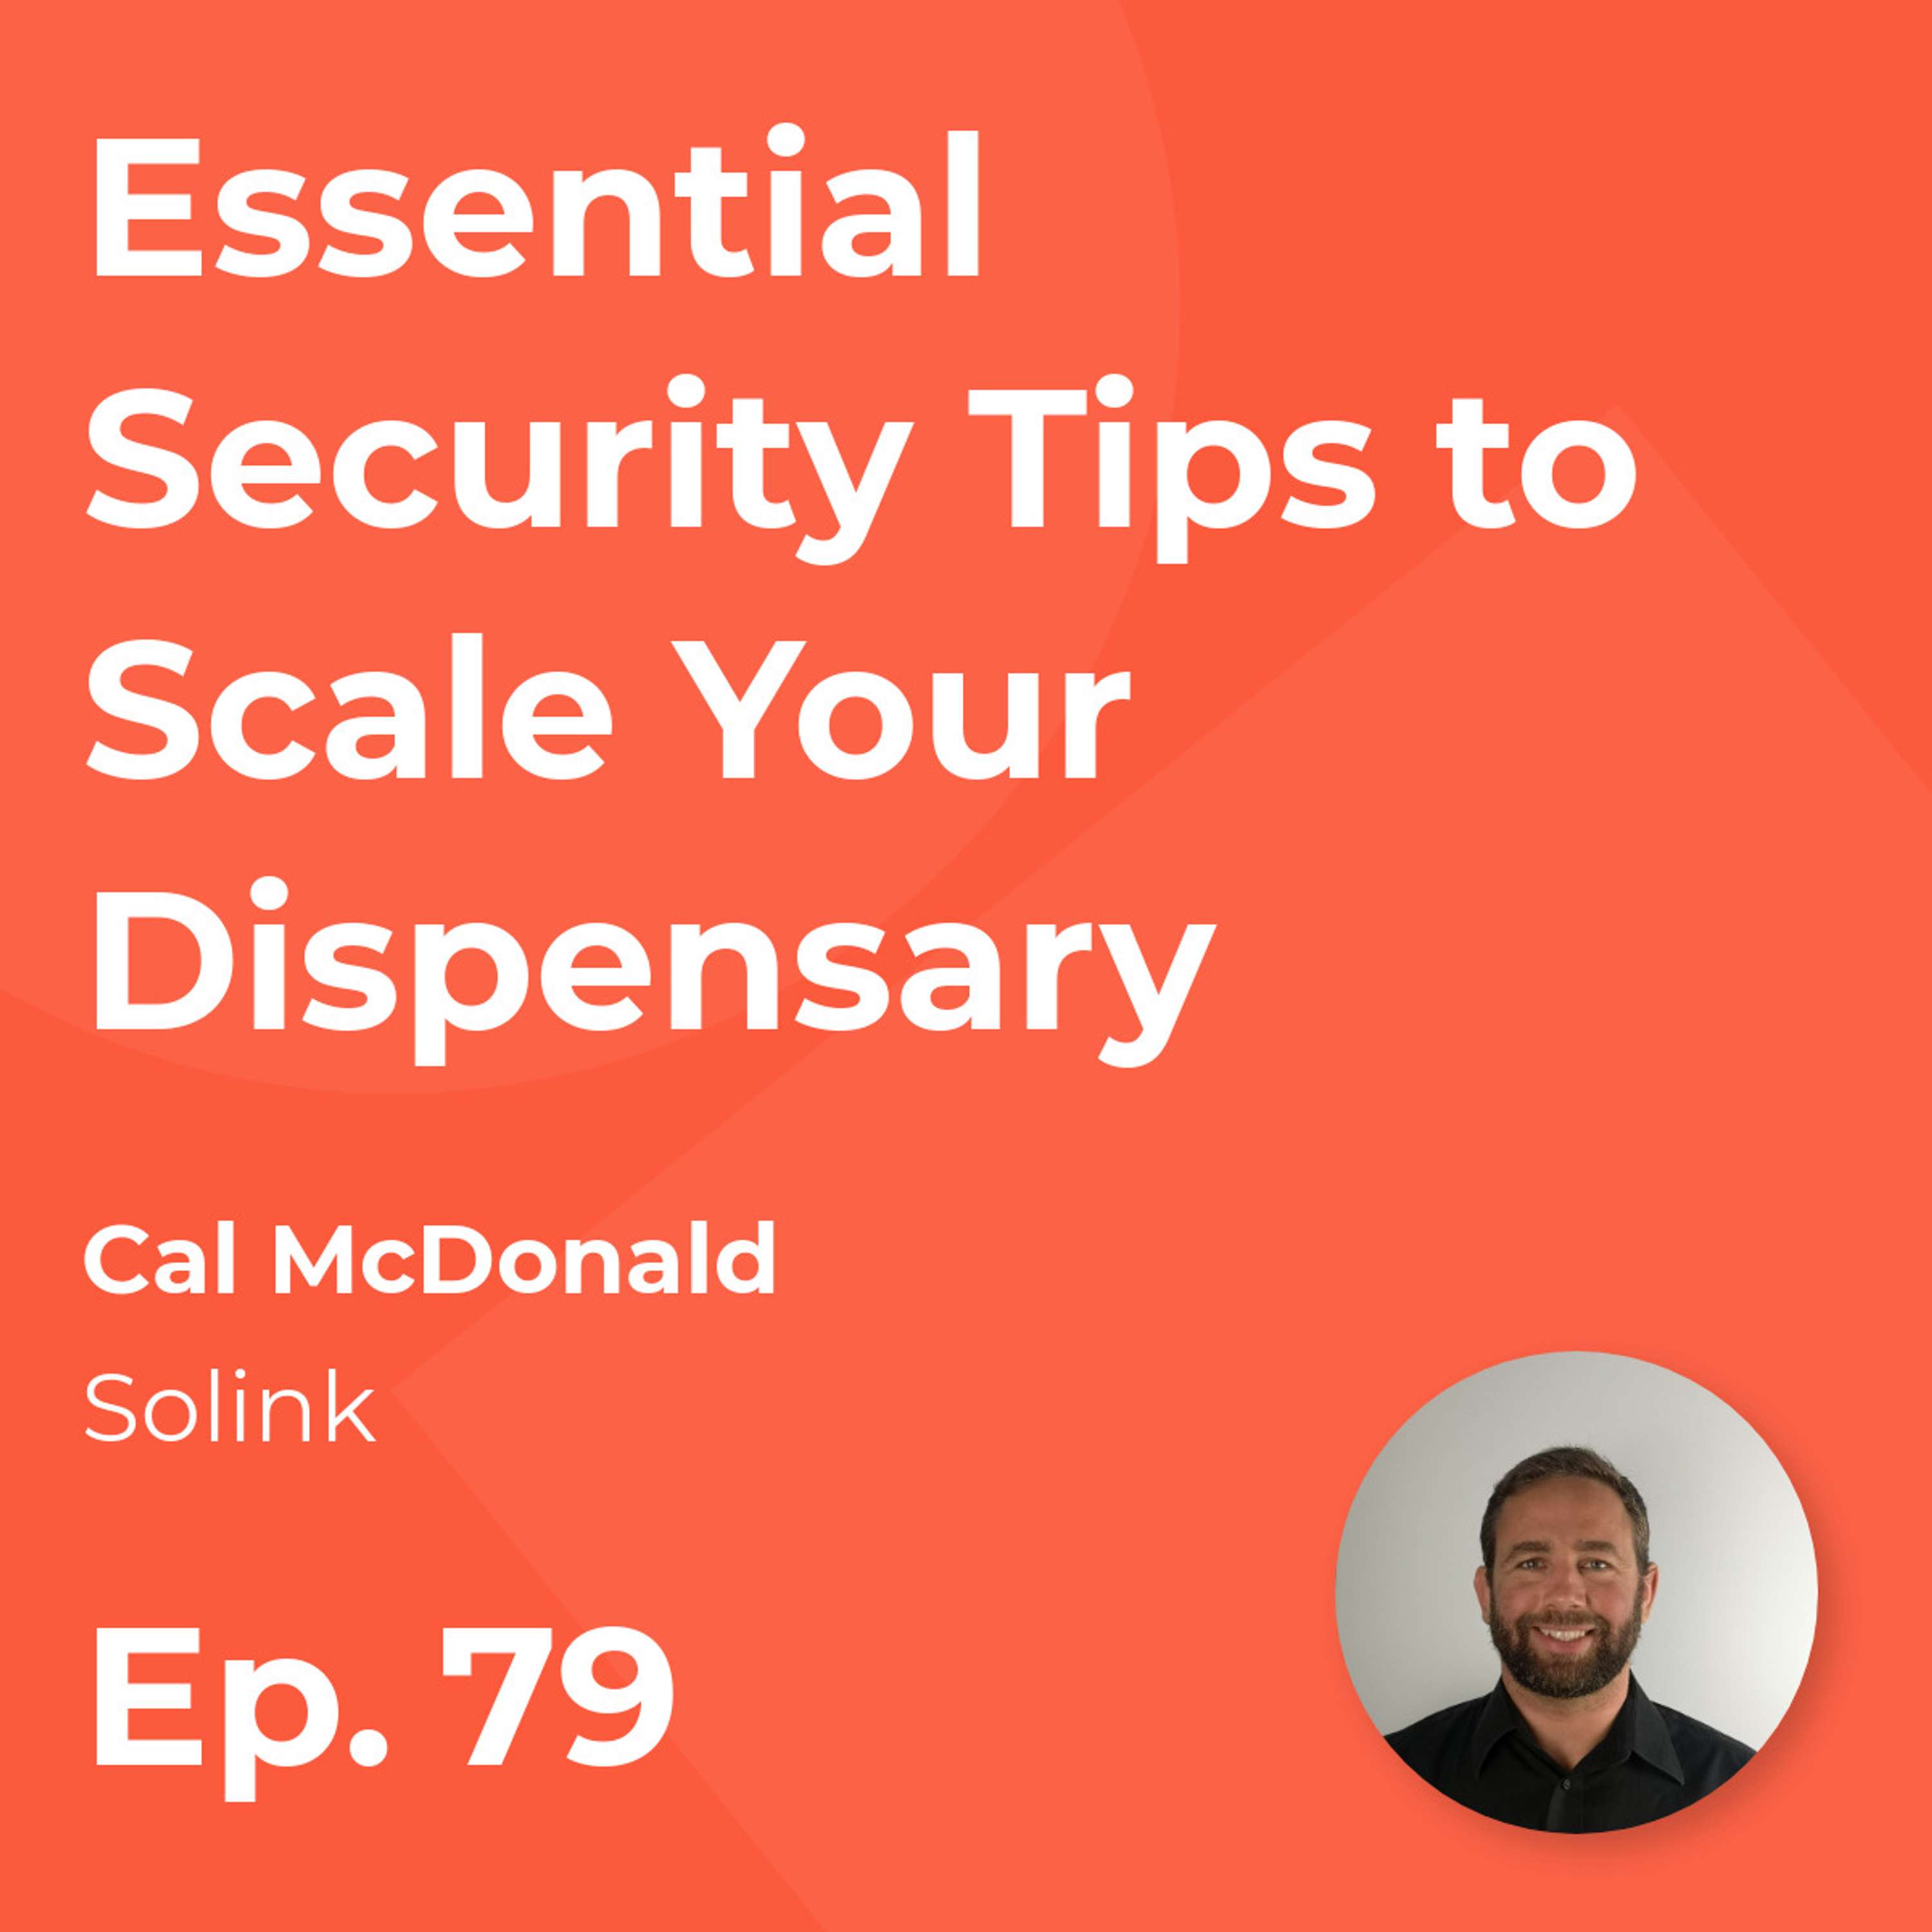 Essential Security Tips to Scale Your Dispensary with Cal McDonald (Solink)